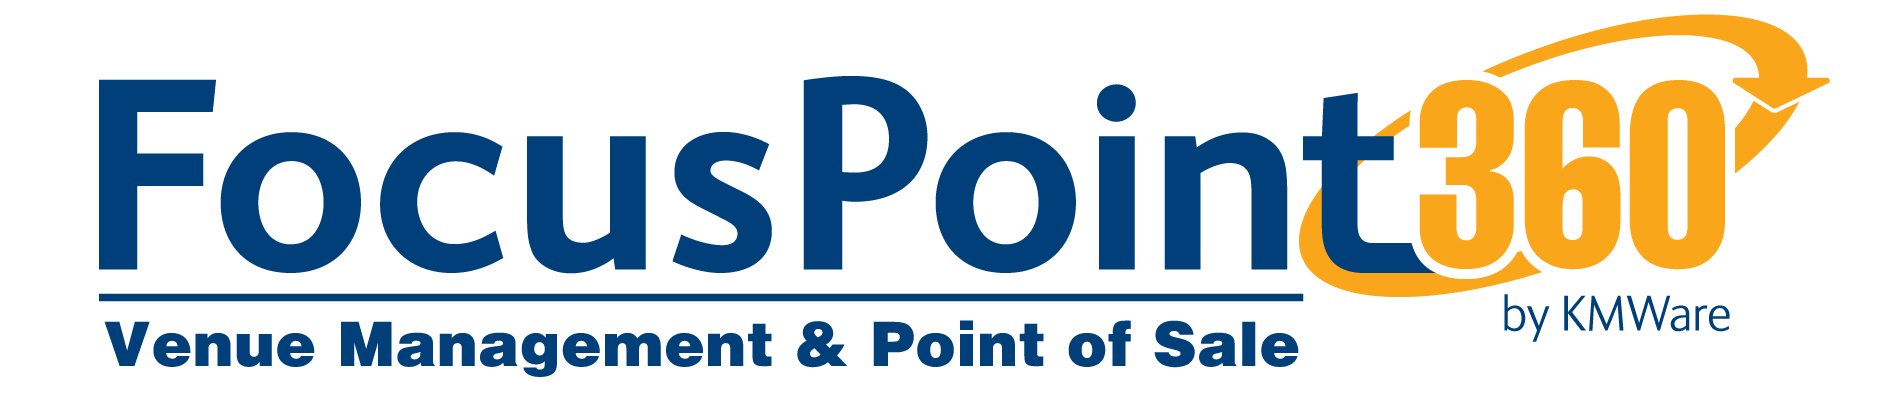  FOCUS POINT 360 BY KM WARE VENUE MANAGEMENT &amp; POINT OF SALE